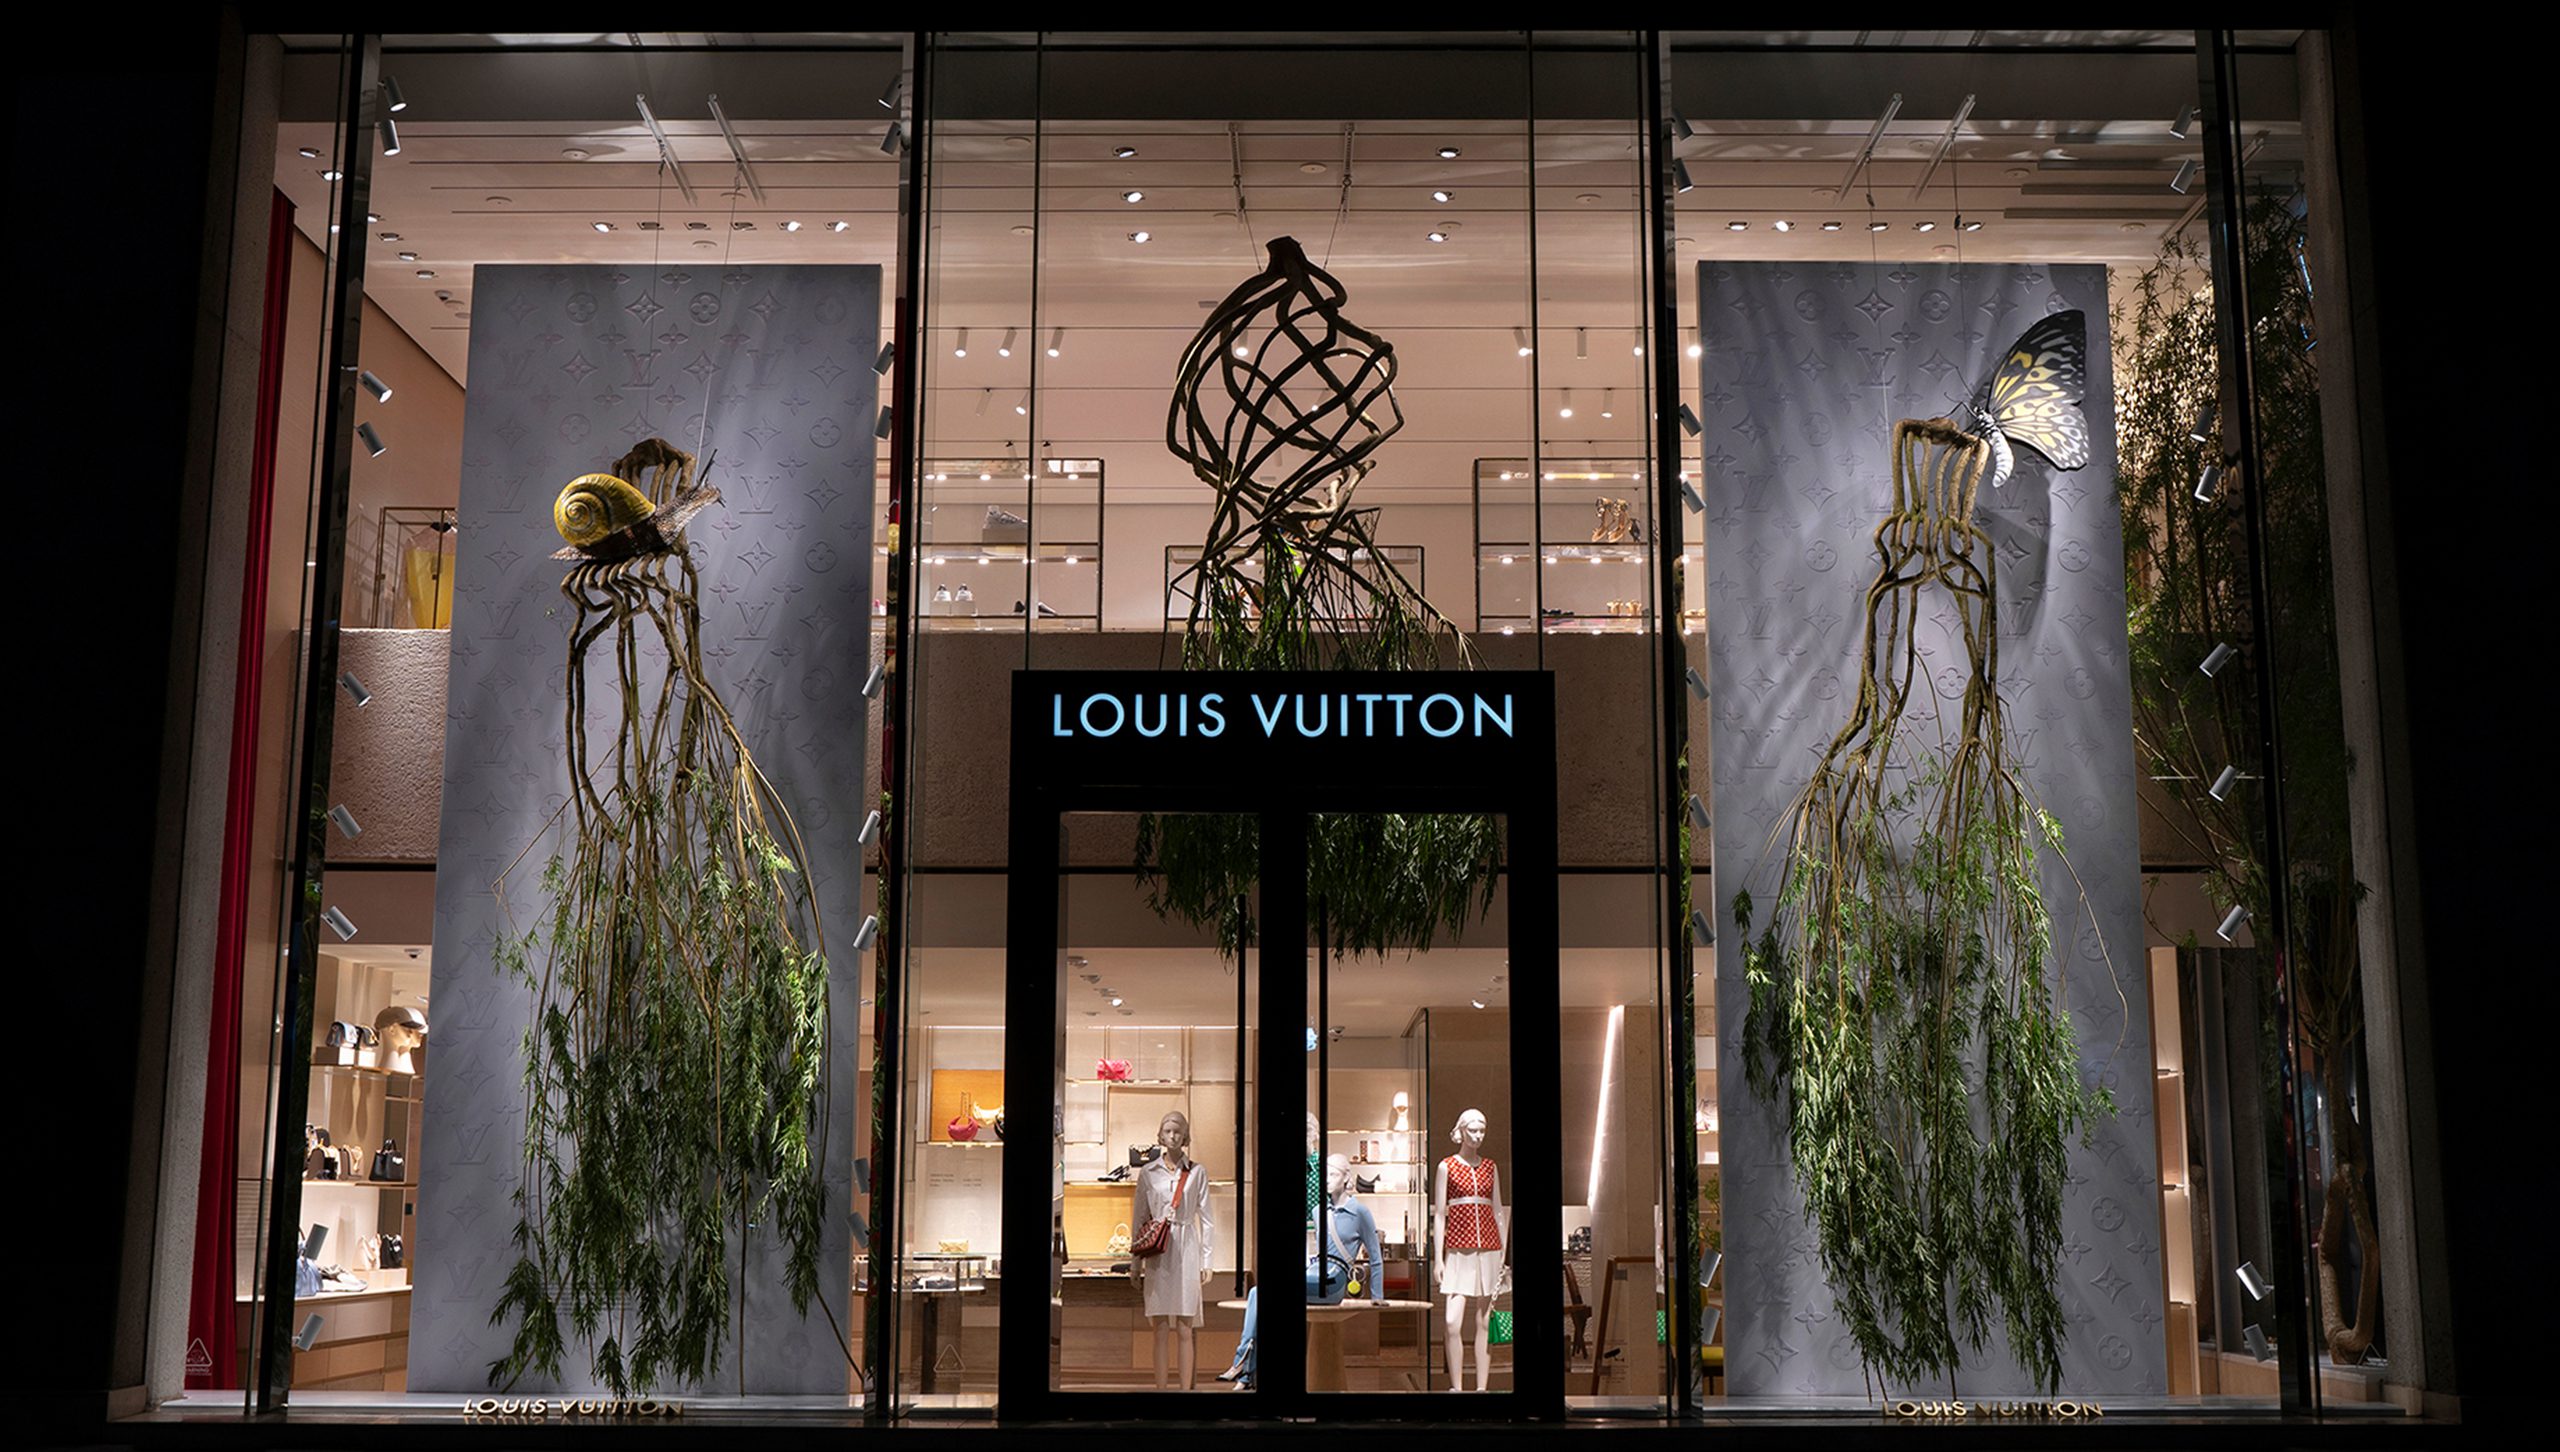 2022 in review - Full Grown Future are Louis Vuitton visionaries